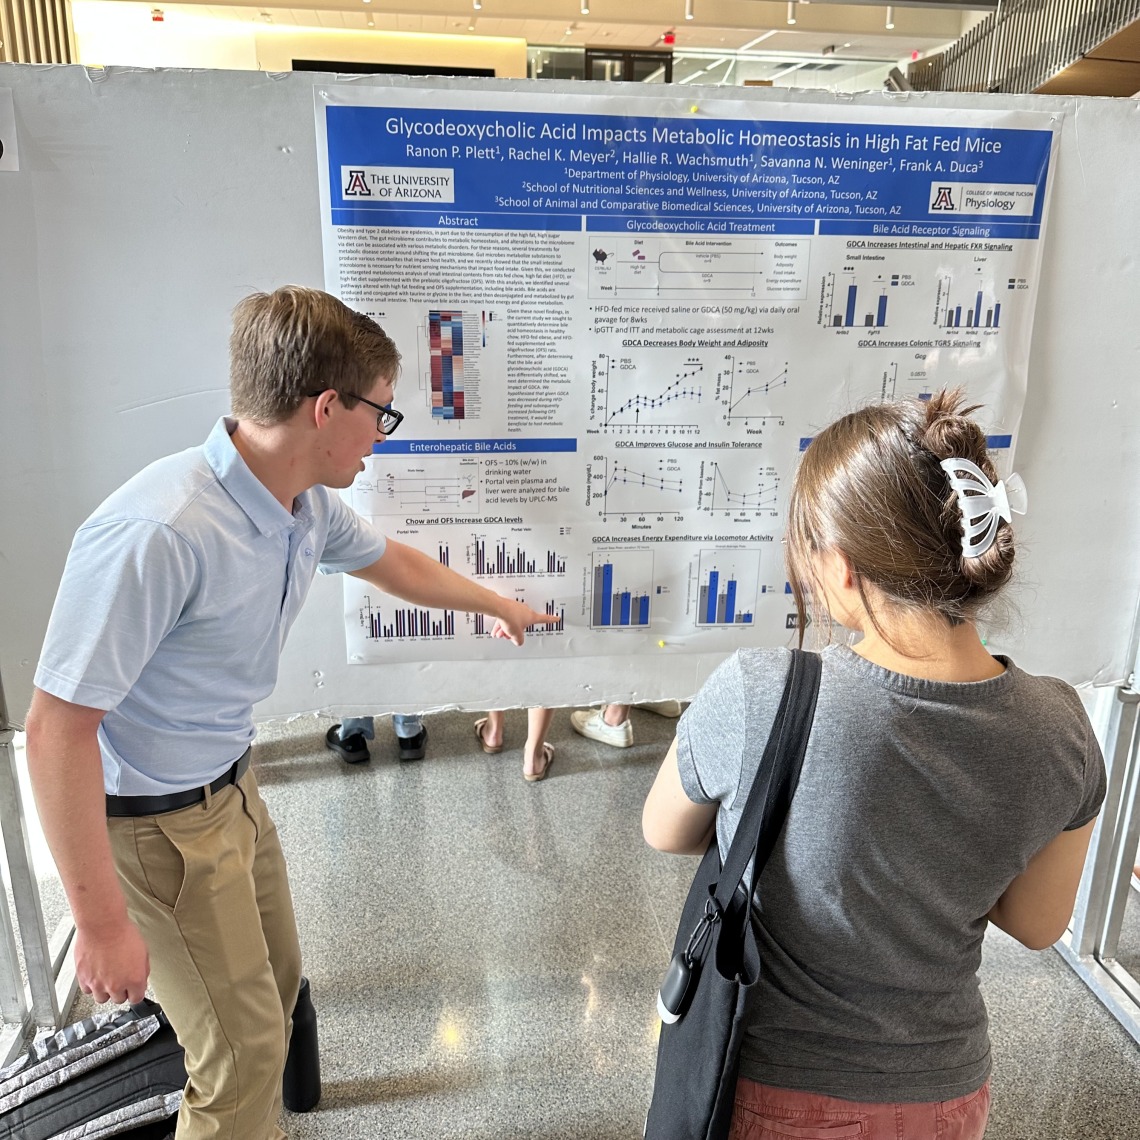 A person pointing at a poster explaining their research to another person.